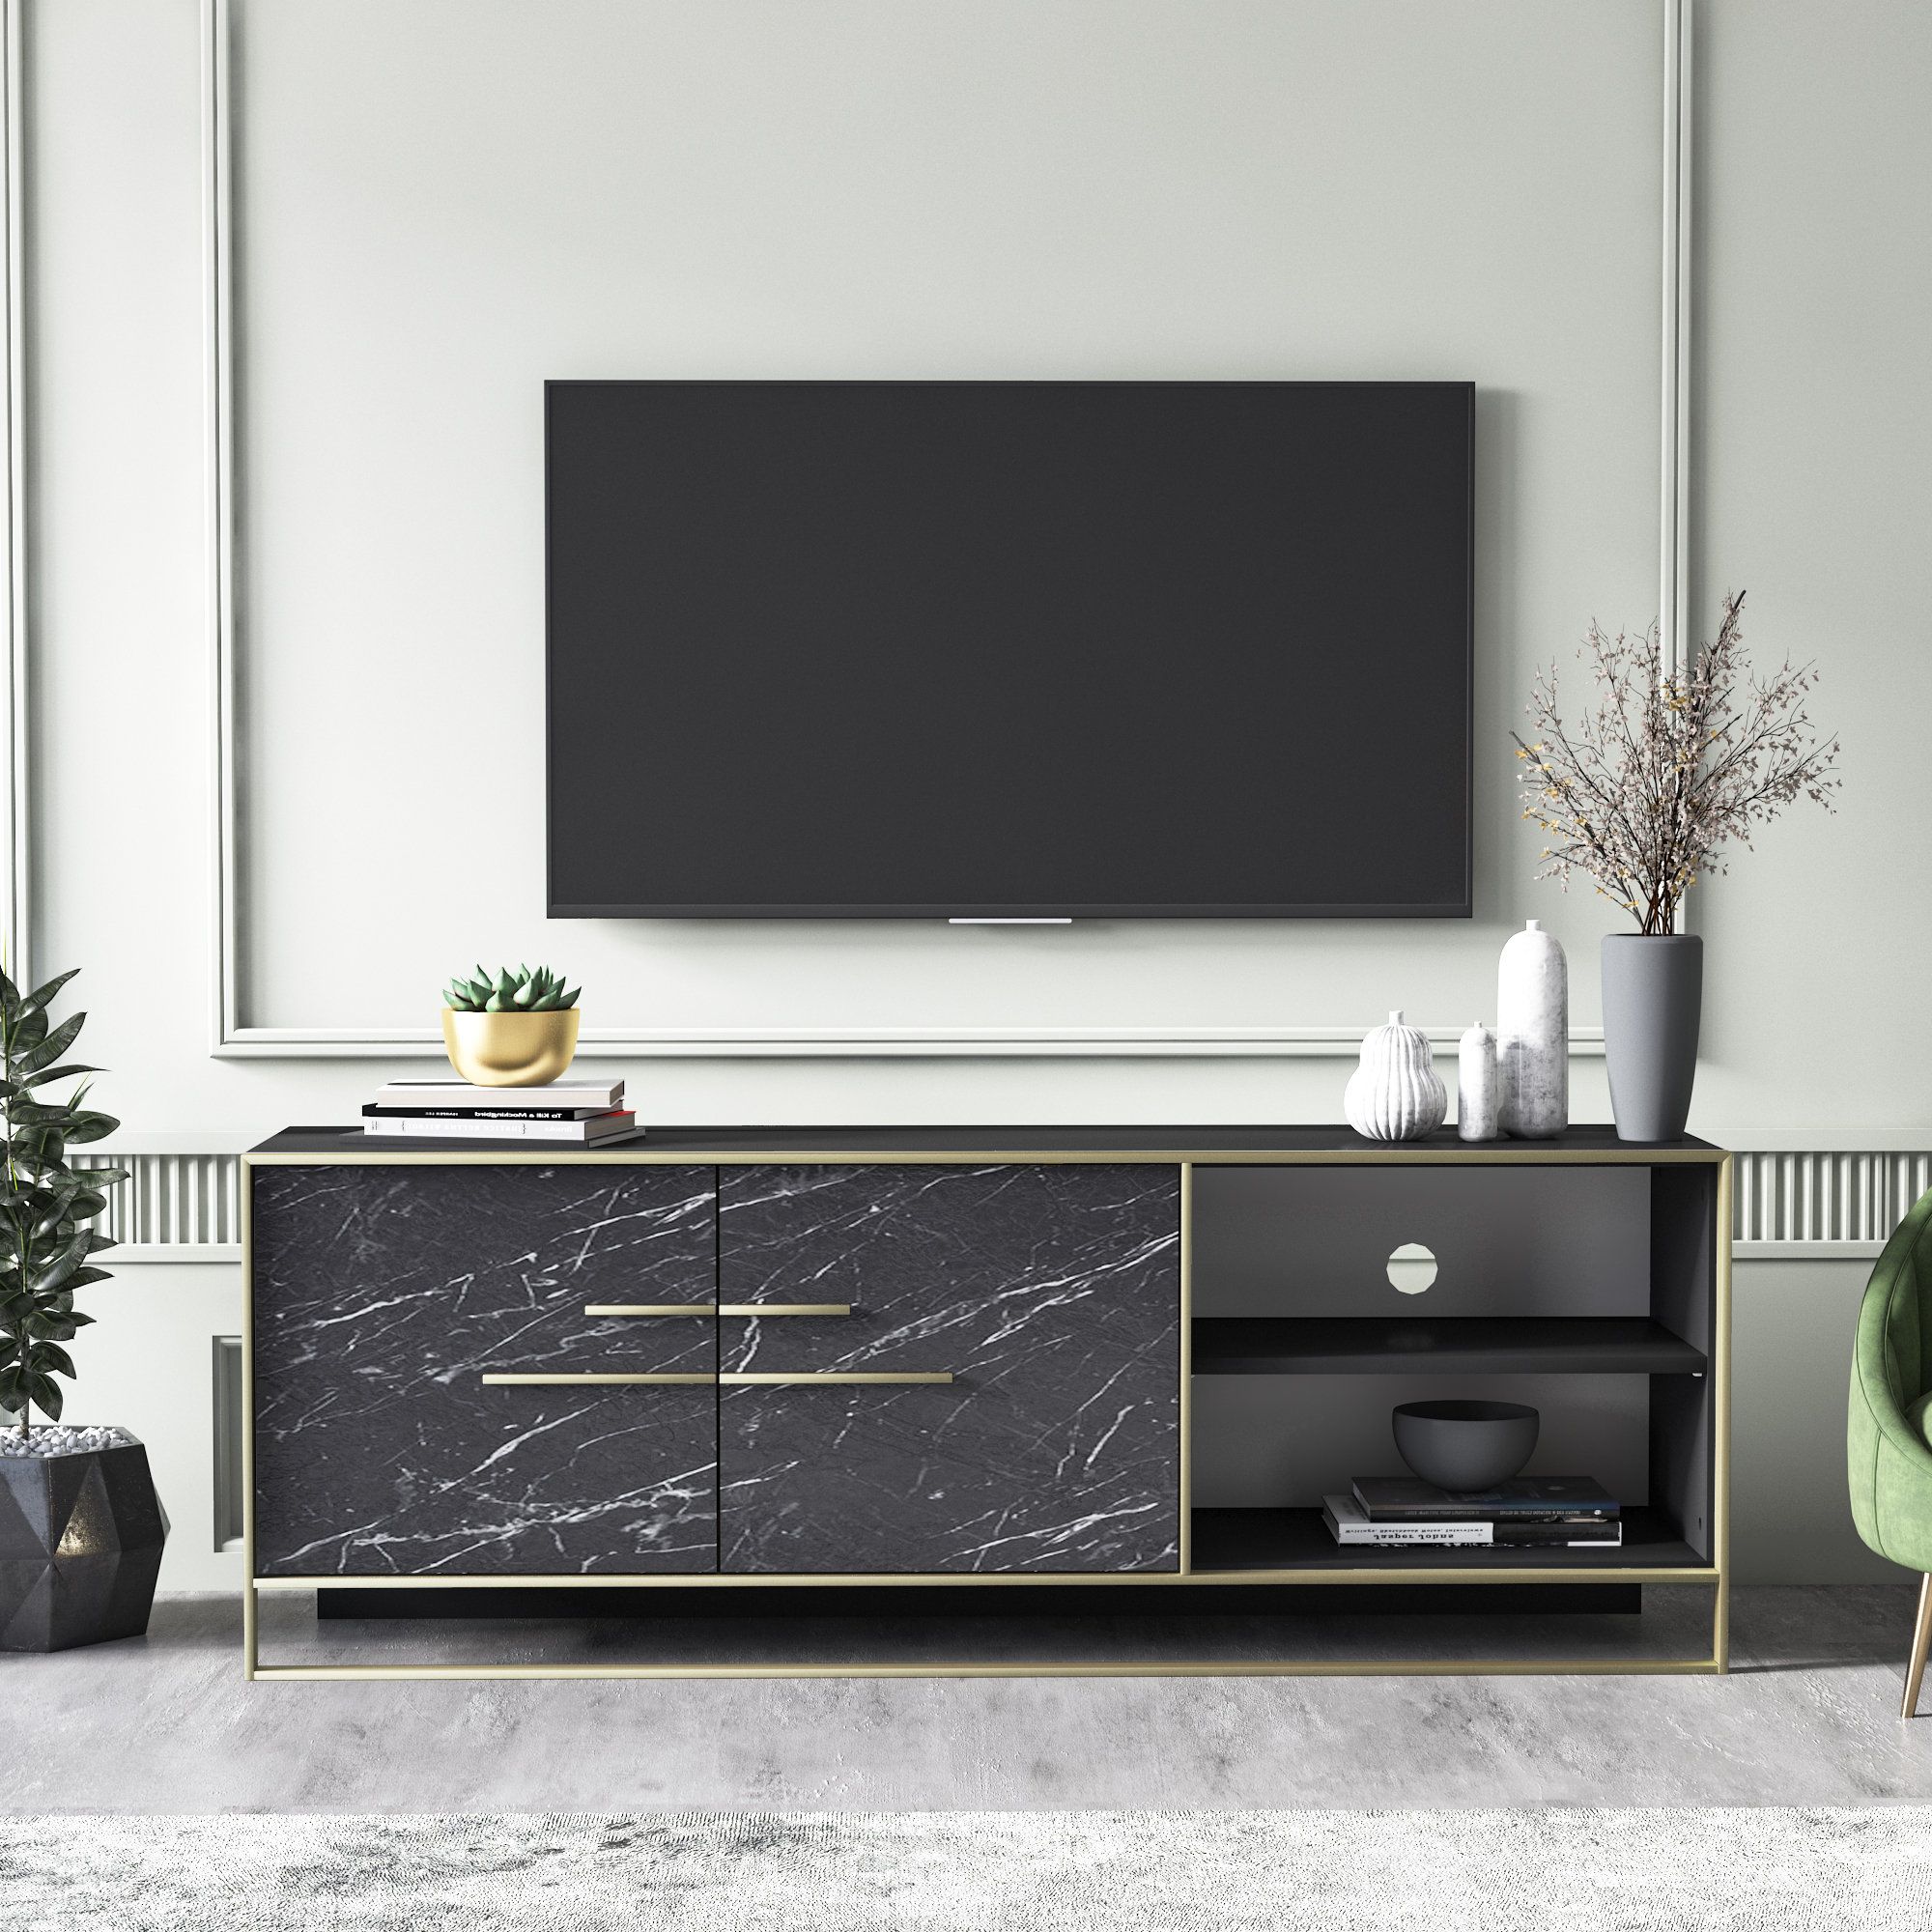 Polkana Black 160 Cm Wide Natural Marble Pattern Tv Unit / Tv | Etsy With Regard To Black Marble Tv Stands (View 2 of 20)